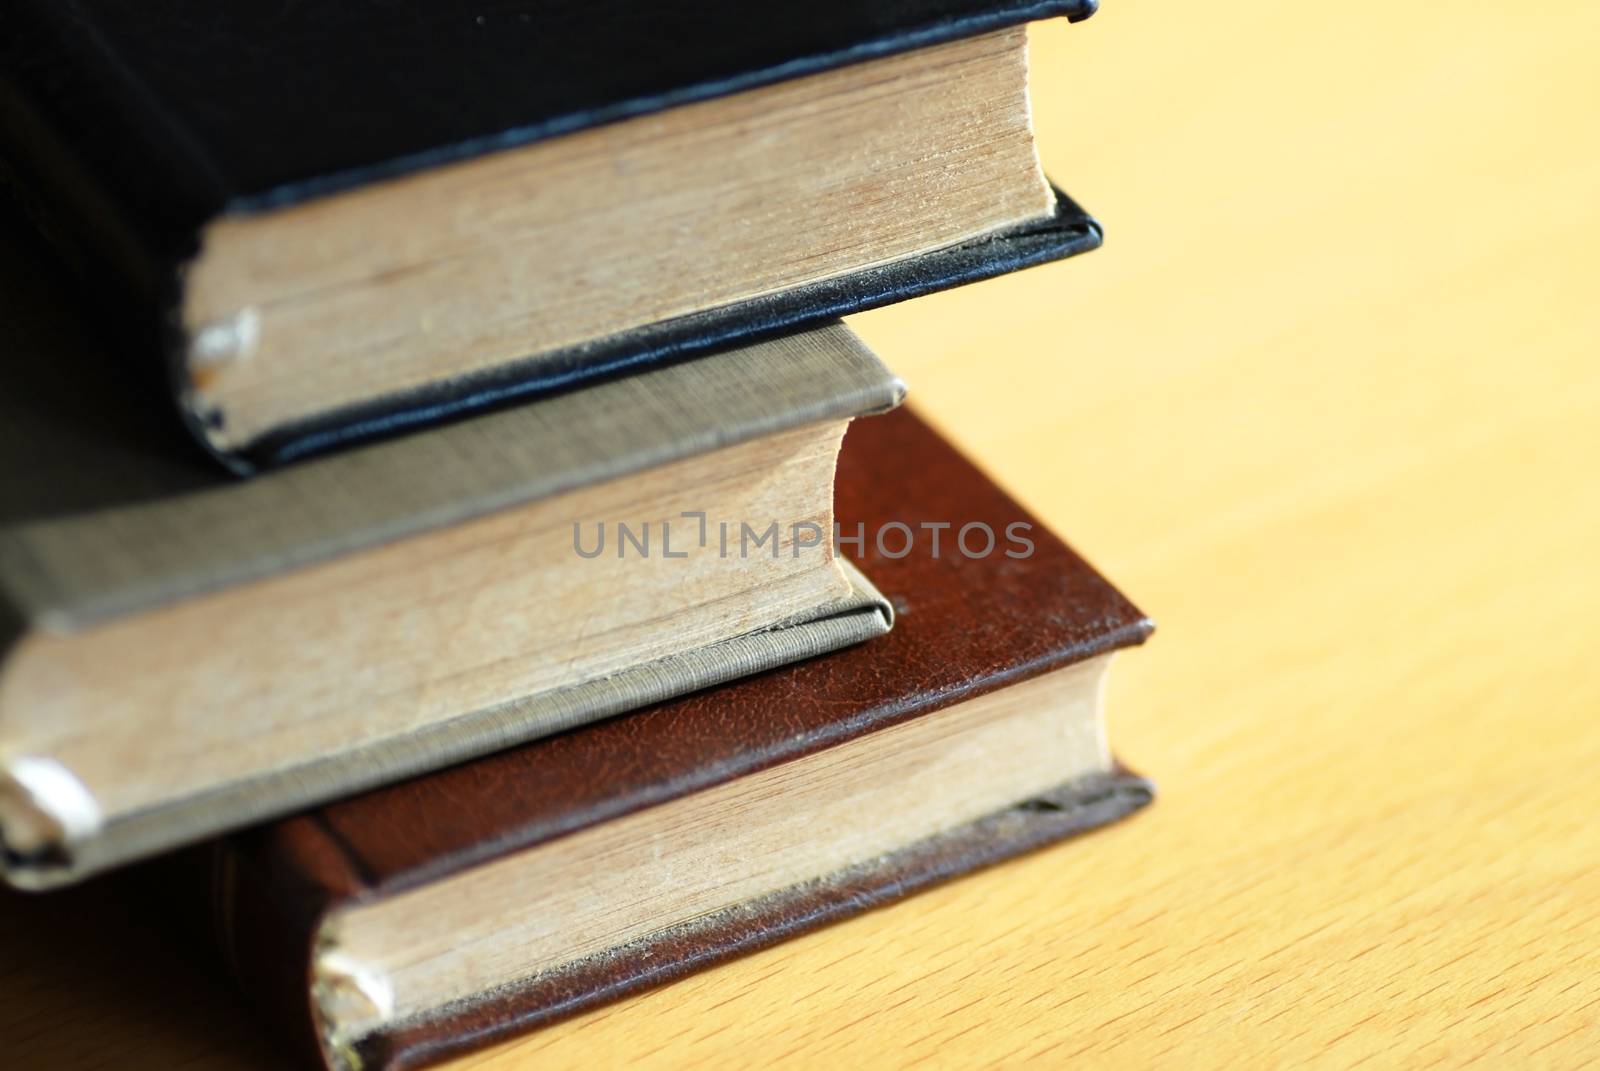 tree small books in pile on the desk